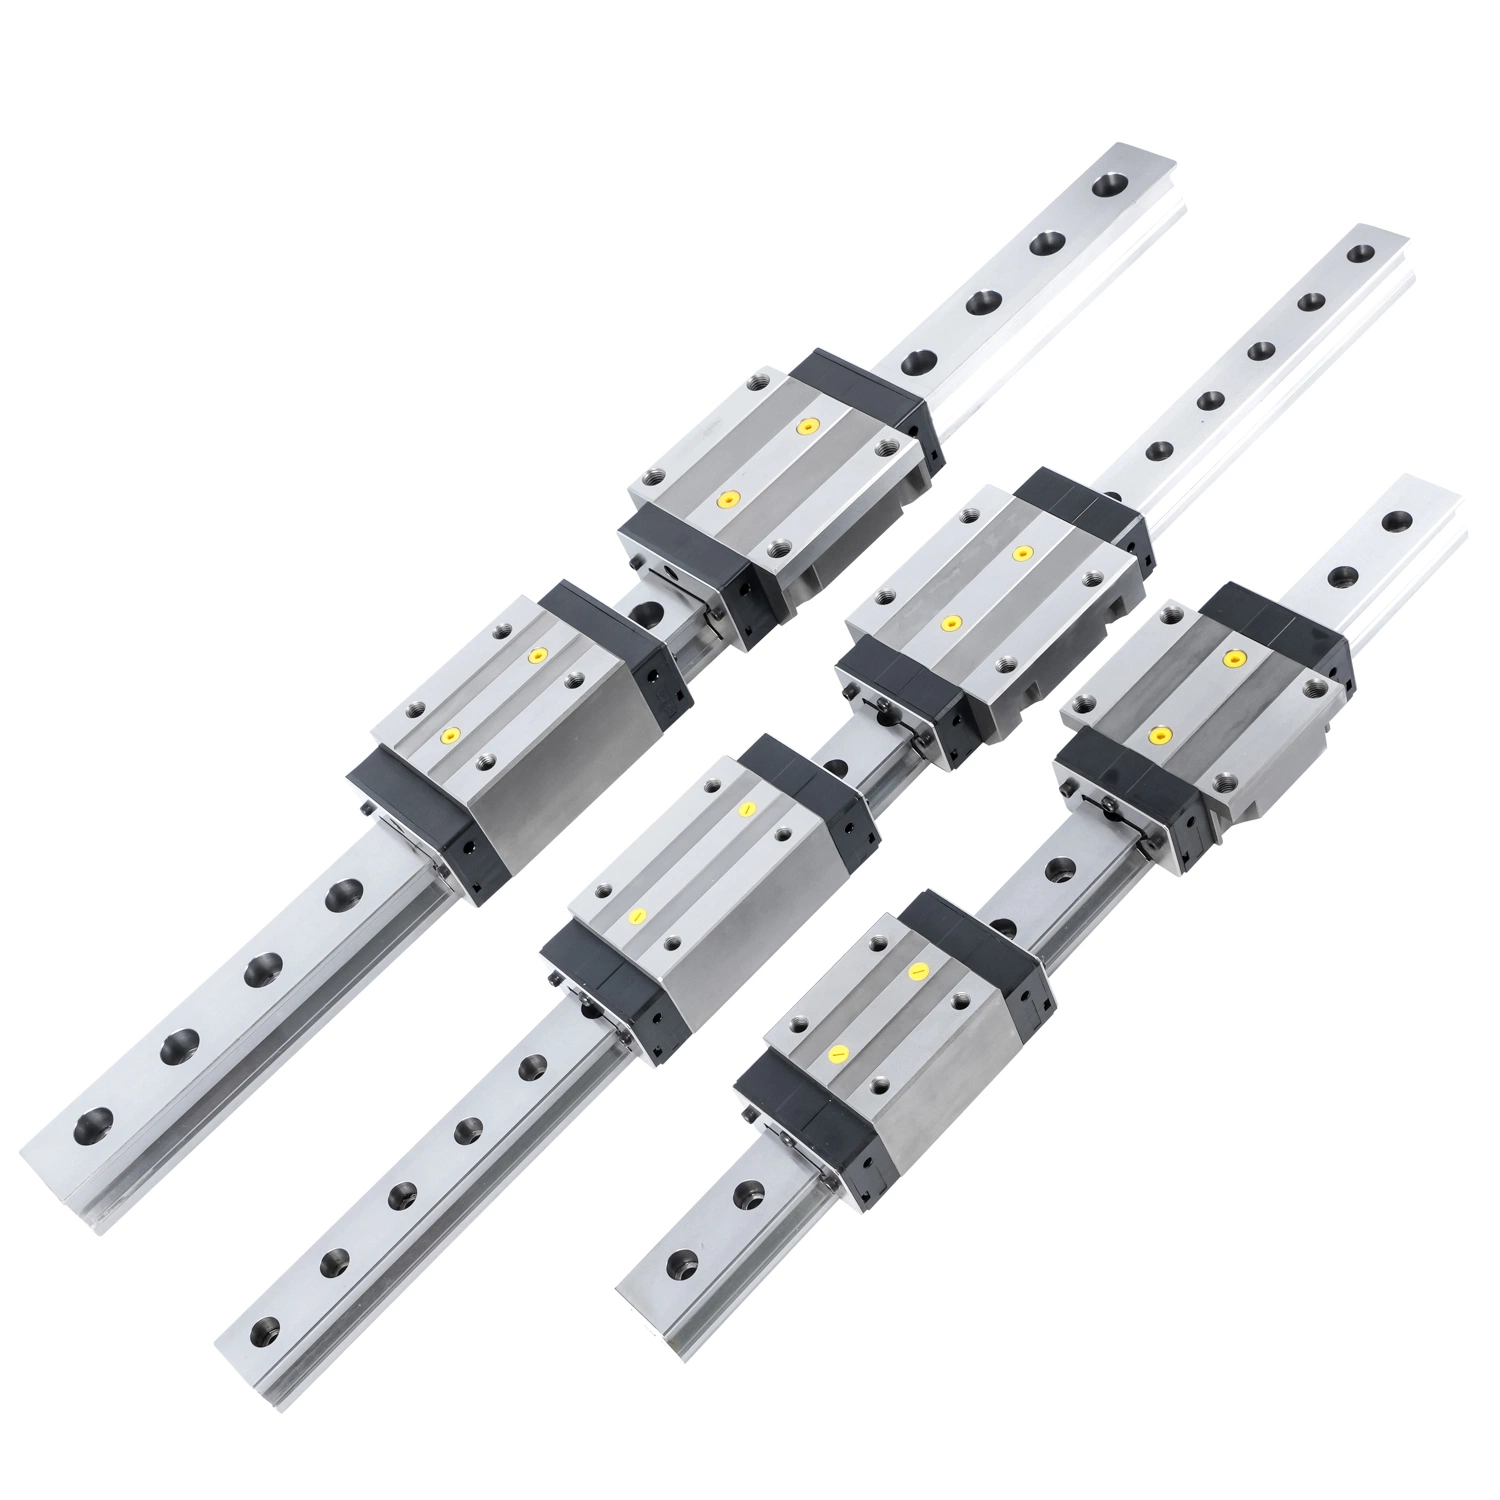 Cgdg Rgh Rgw Roller Type Linear Guide for Heavy-Duty Use